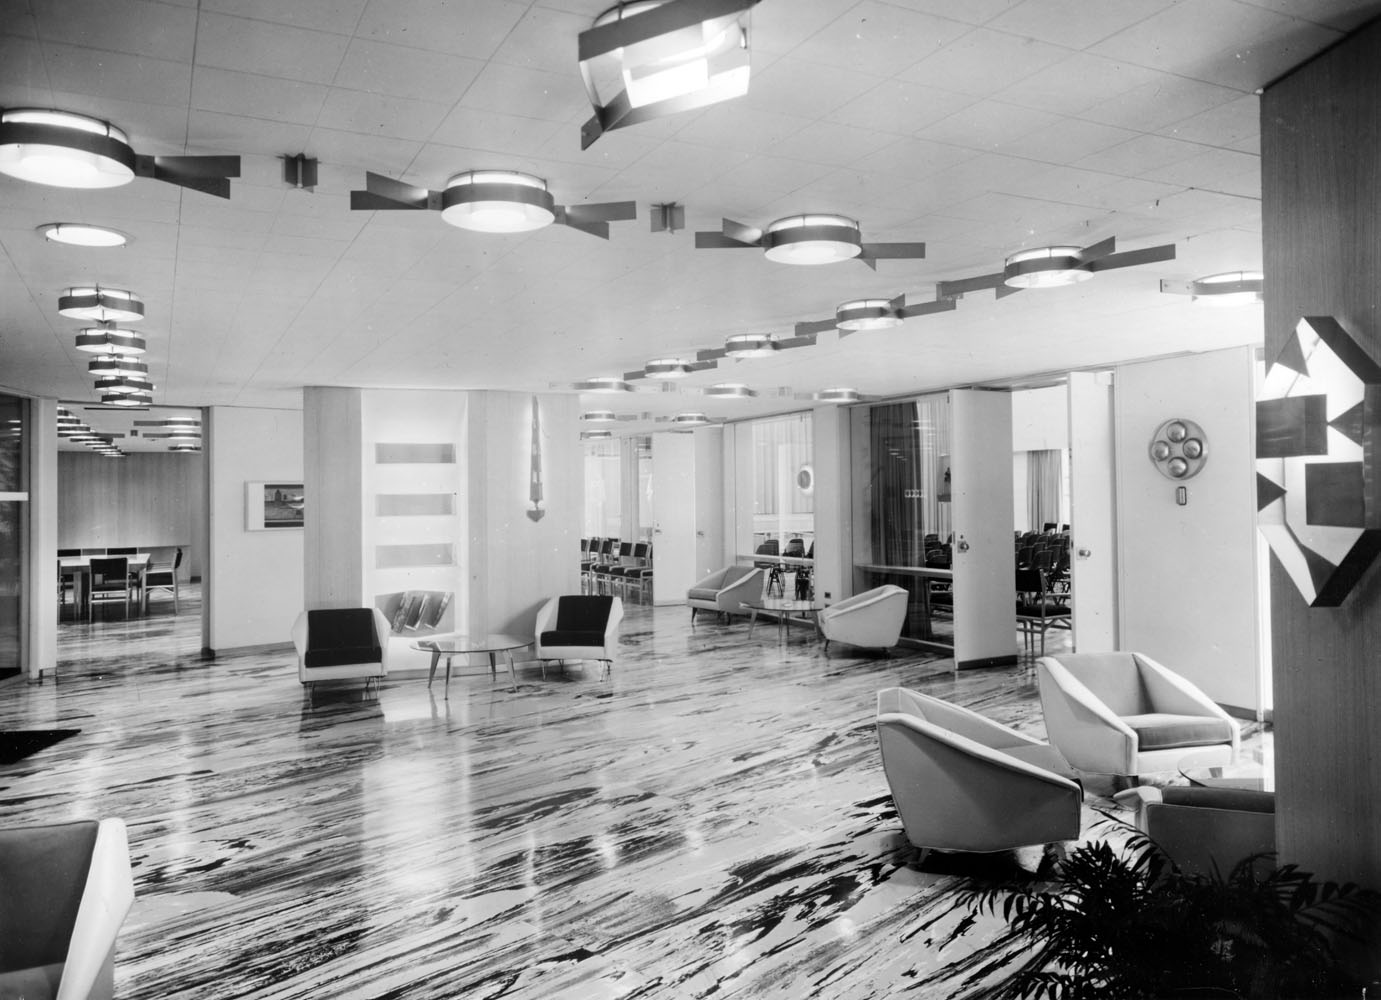 On to the next meeting— but let's take a moment to gaze at this gleaming space-age lobby ...